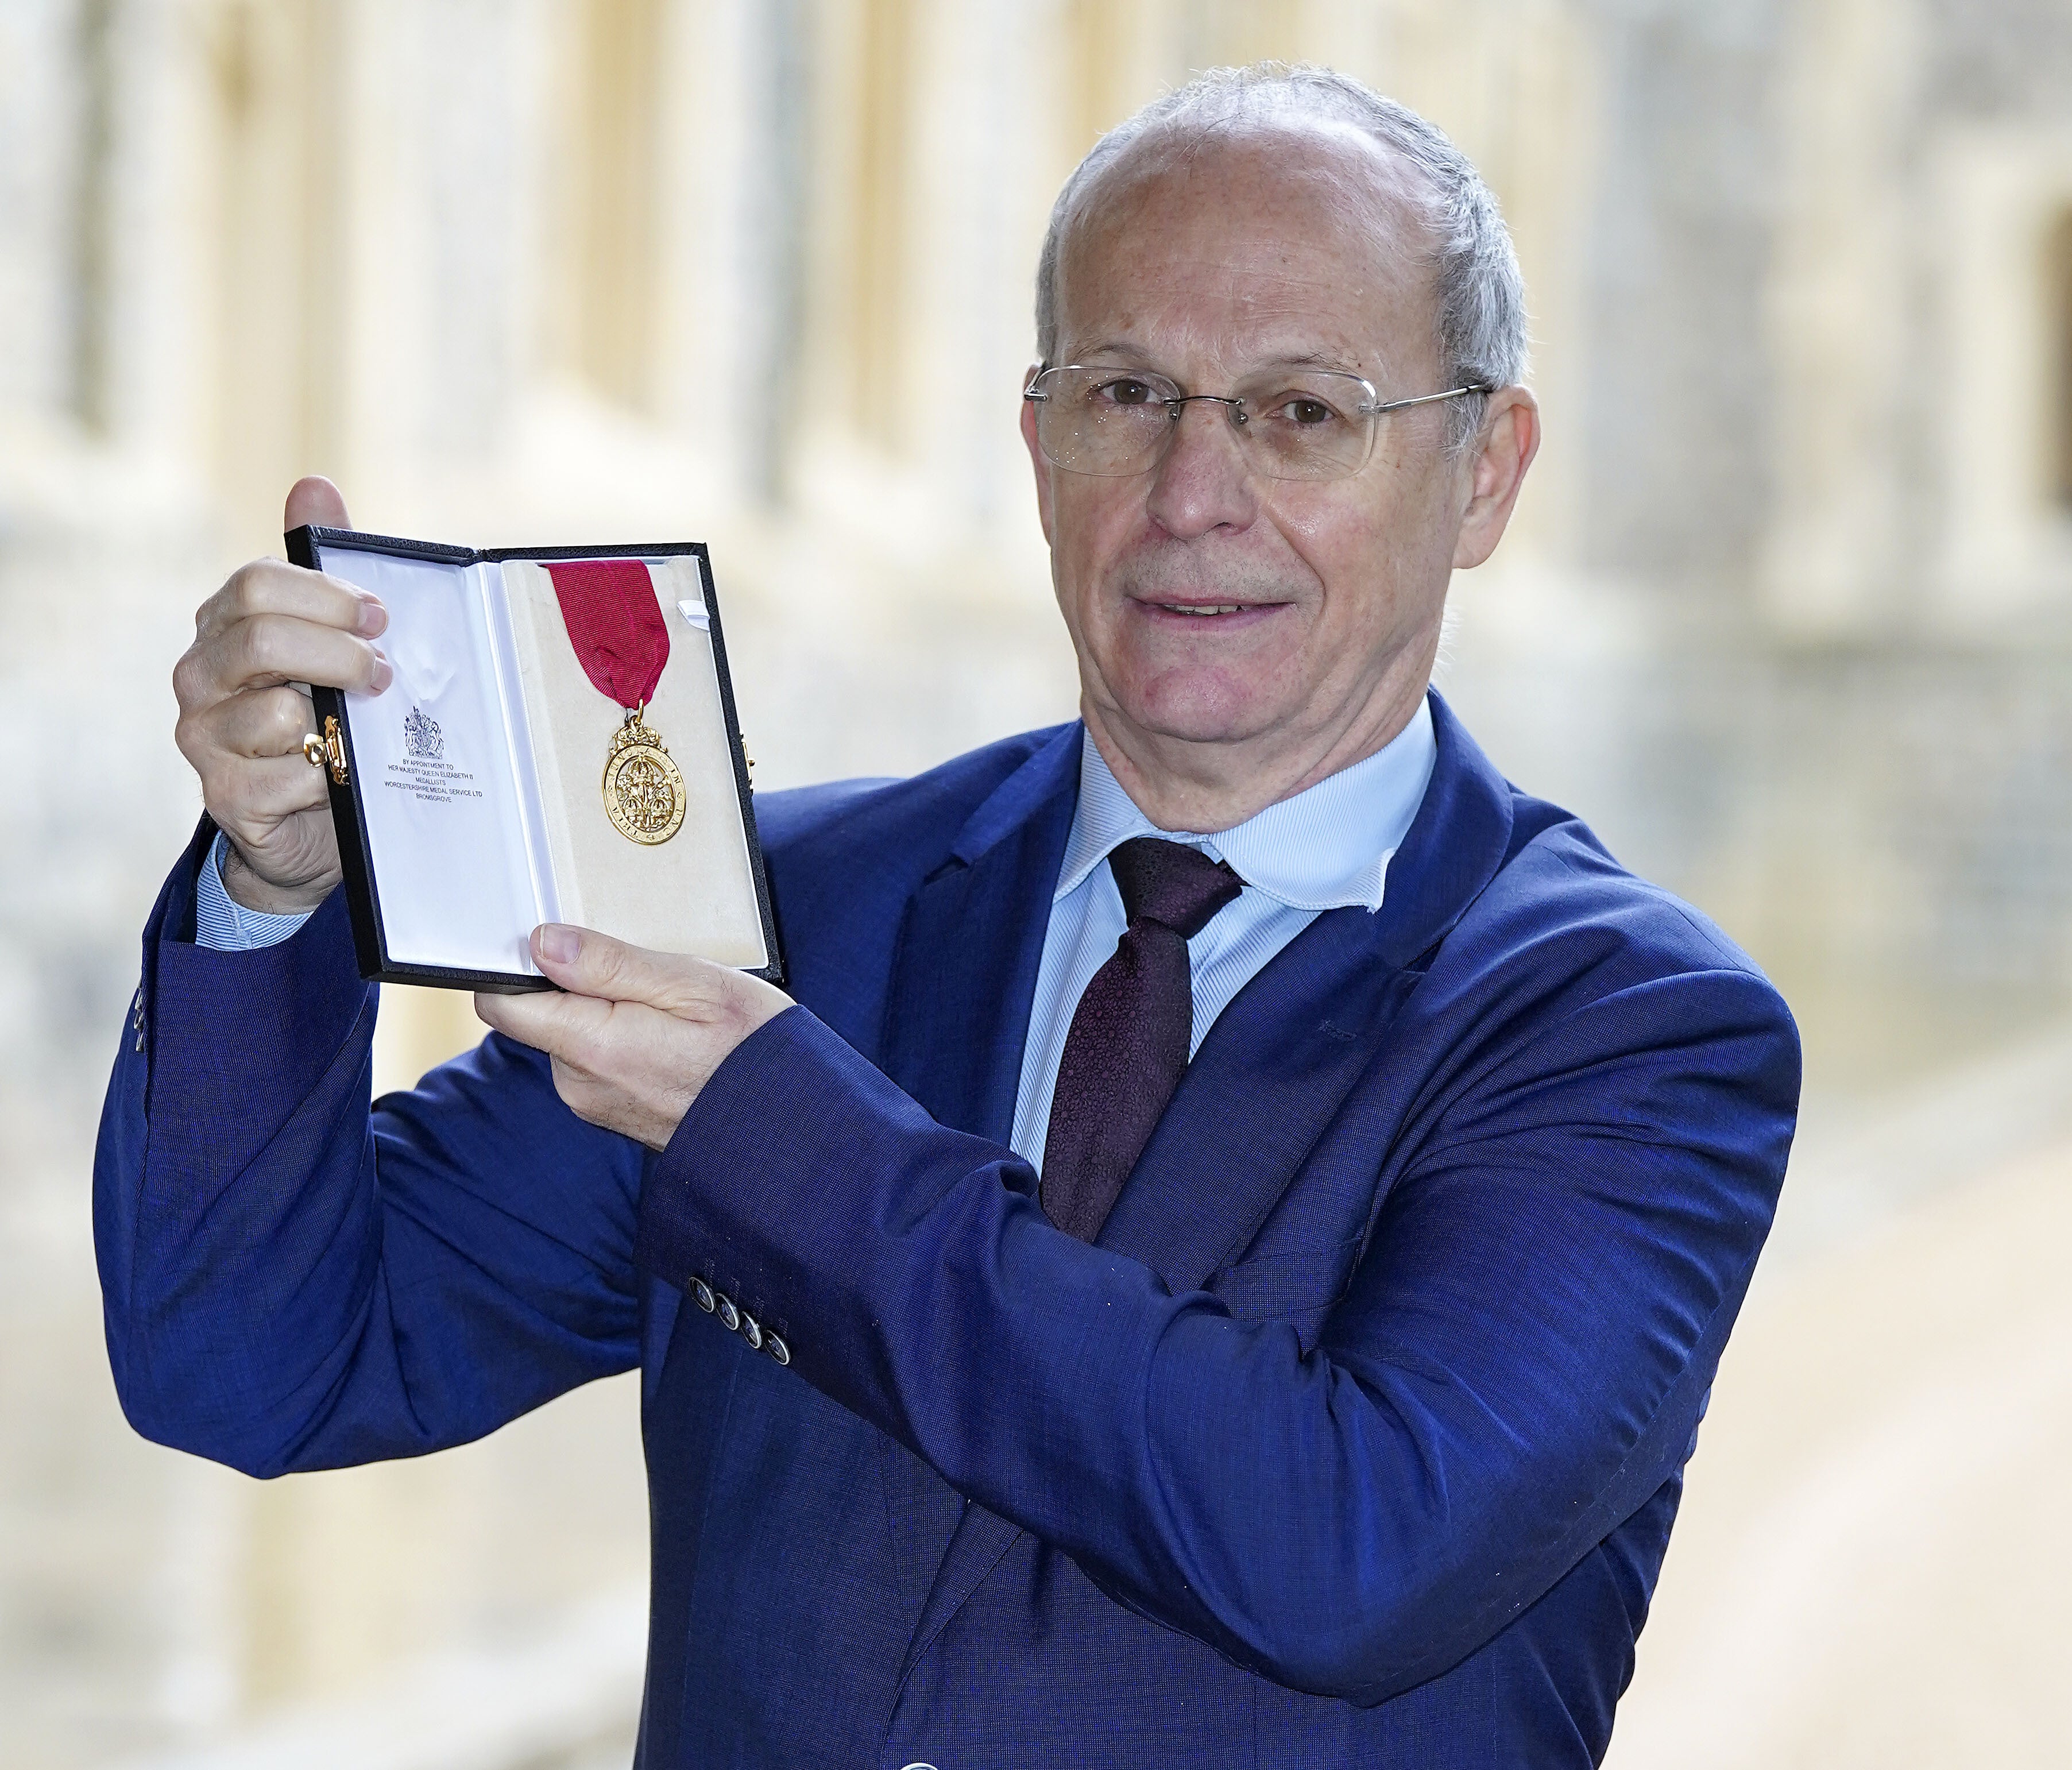 Peter Betts from London with his award after he was made a Companion Order Of The Bath by the Duke of Cambridge (Steve Parsons/PA)